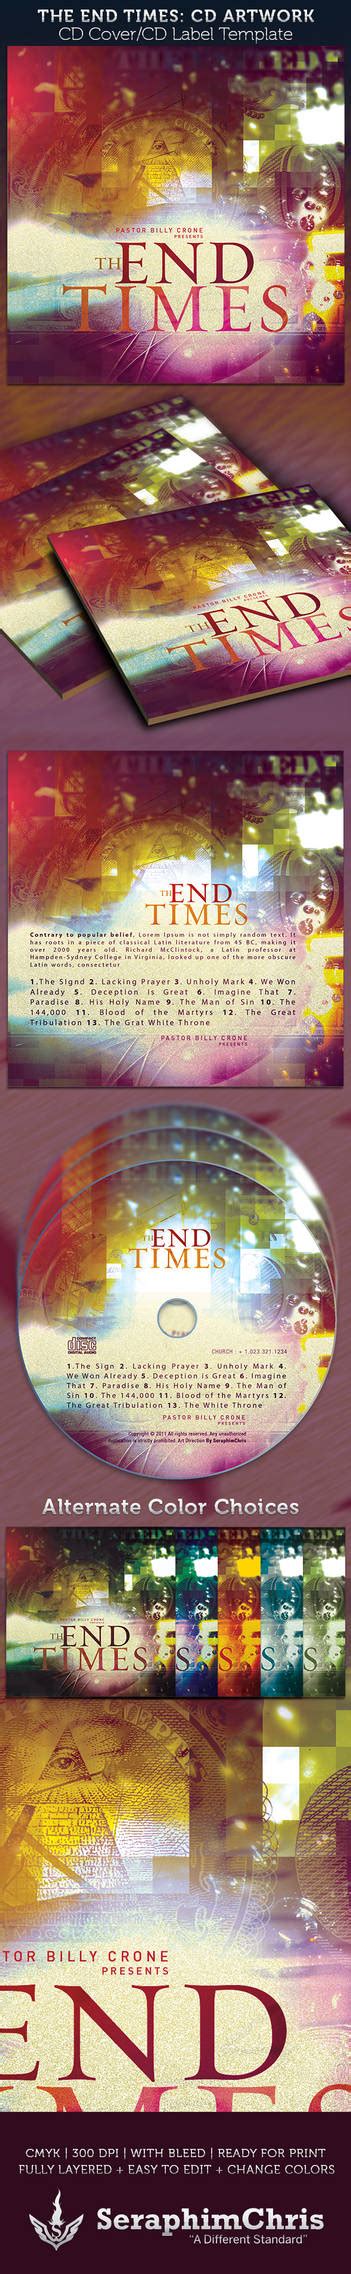 The End Times Cd Cover Artwork Template Preview By Seraphimchris On